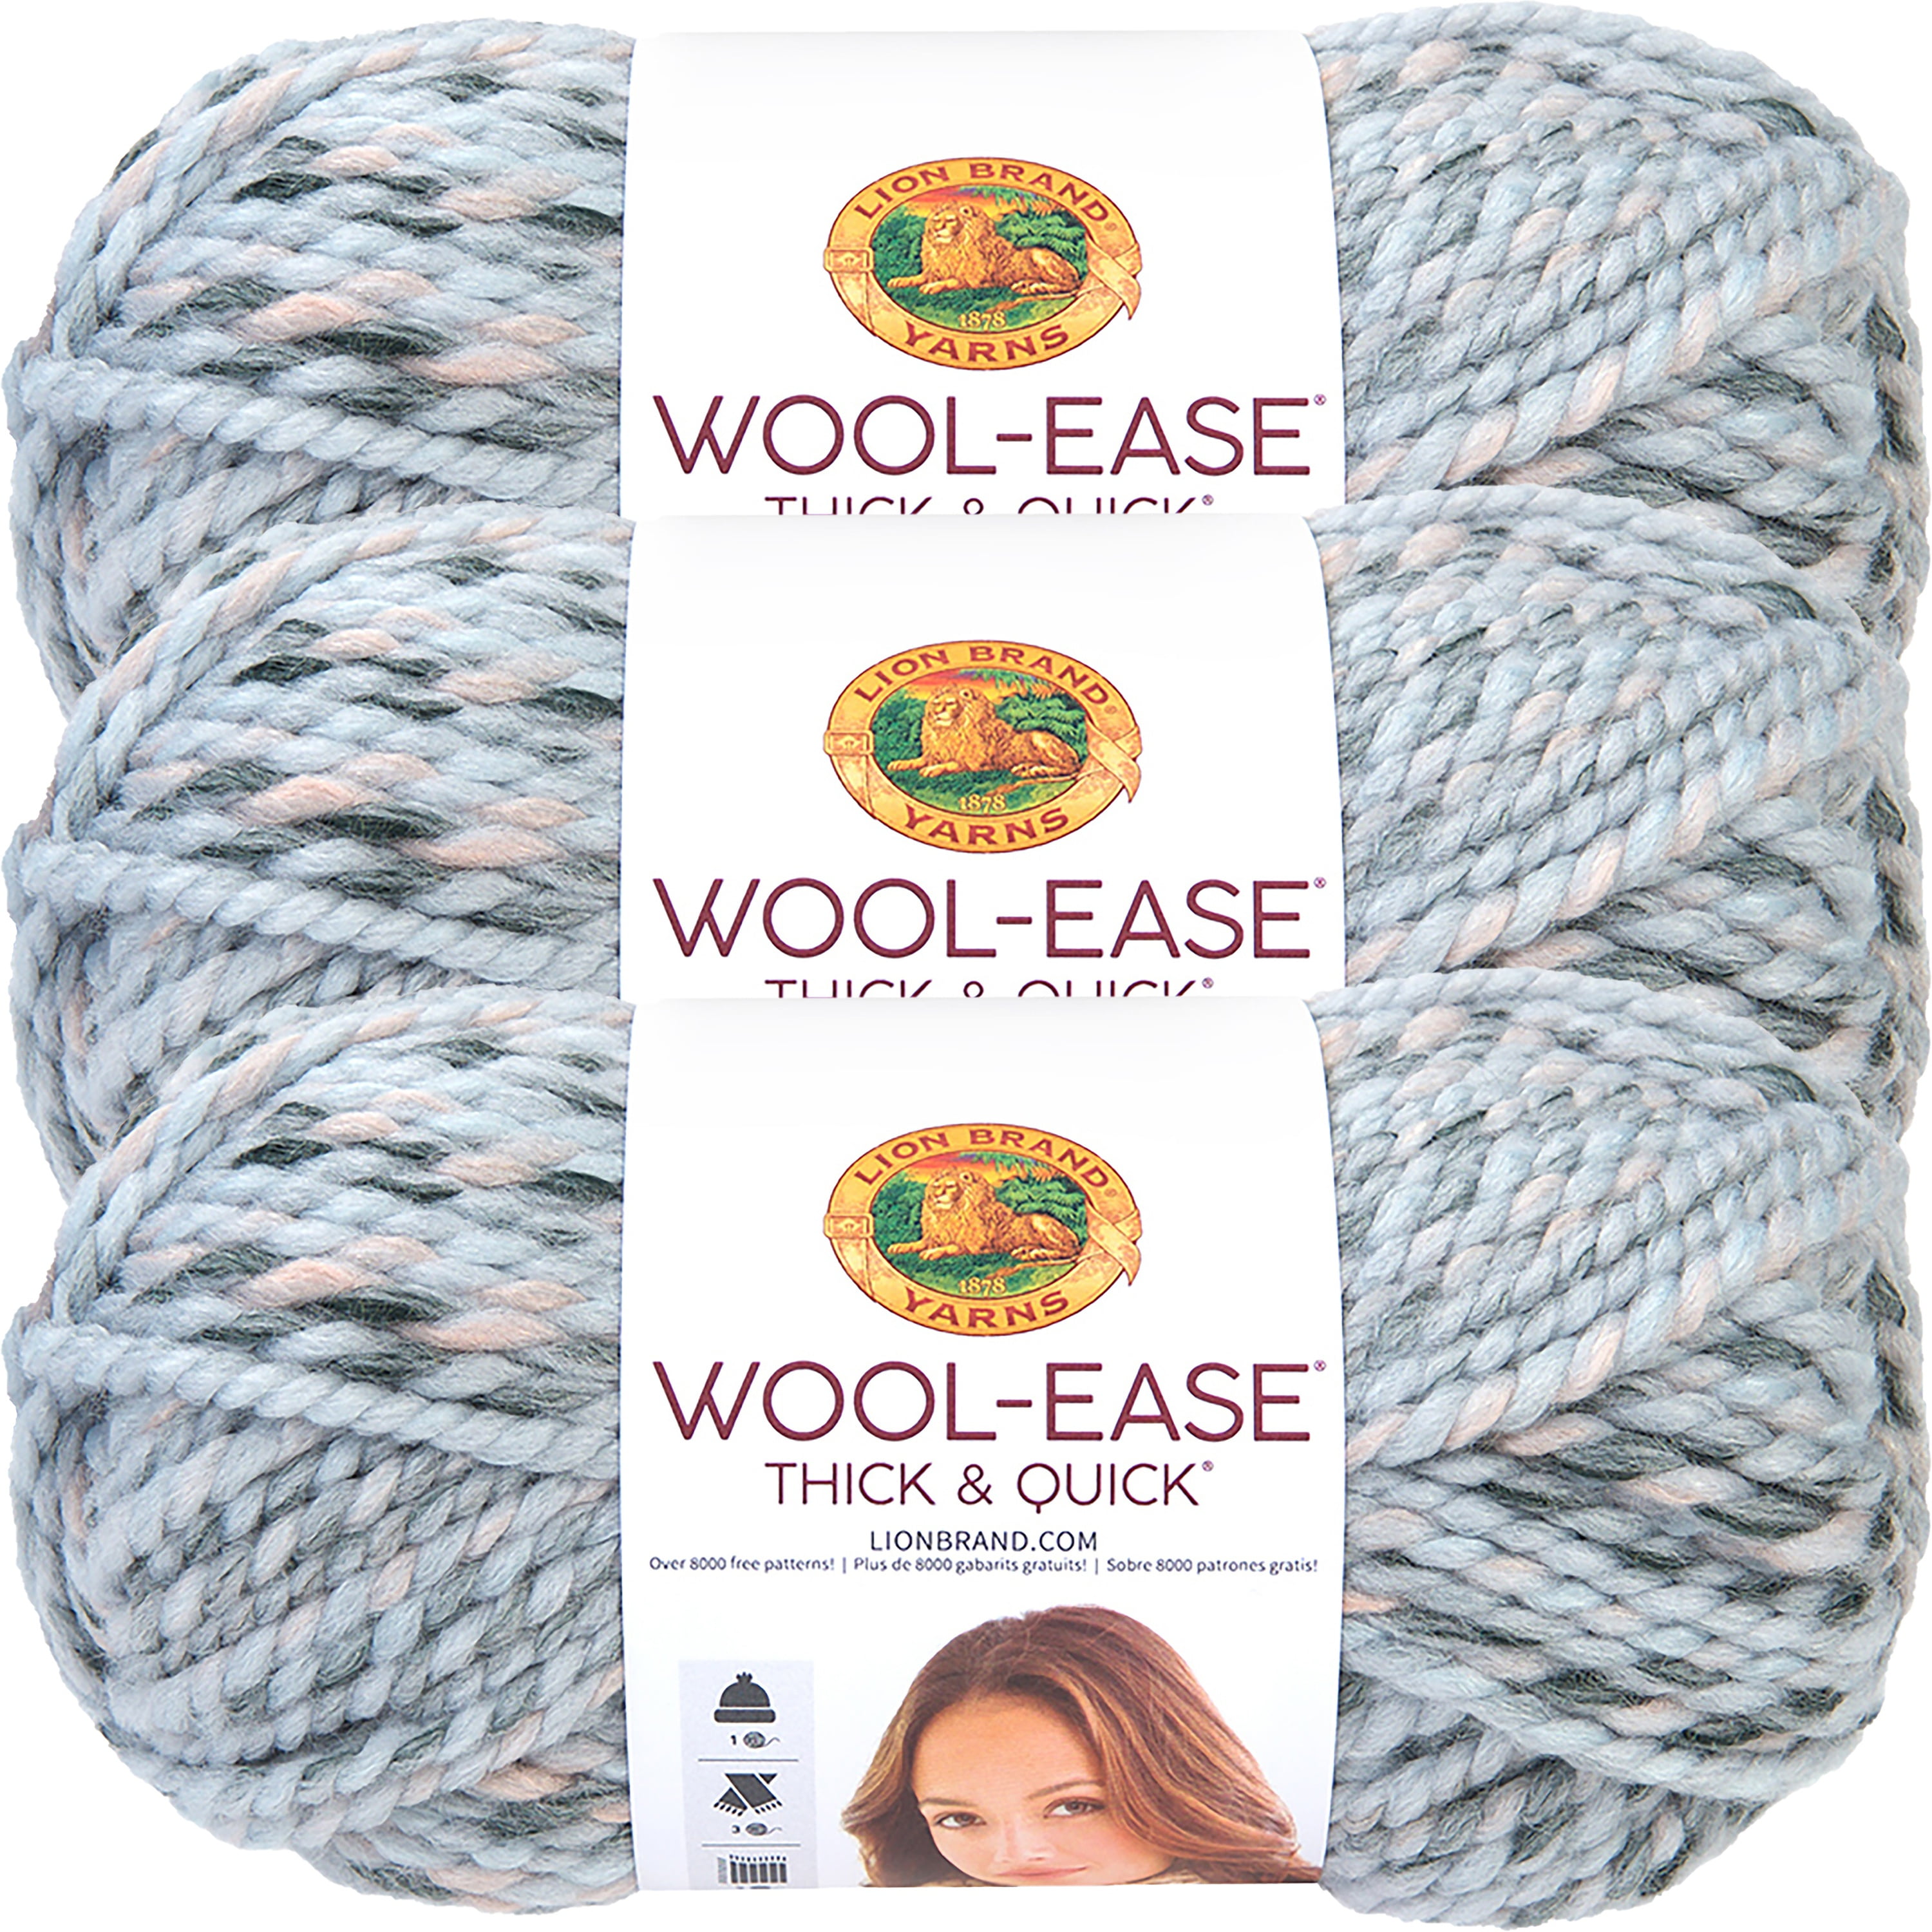 Lion Brand Wool-Ease Thick & Quick Yarn-Arctic Ice, Multipack Of 3 